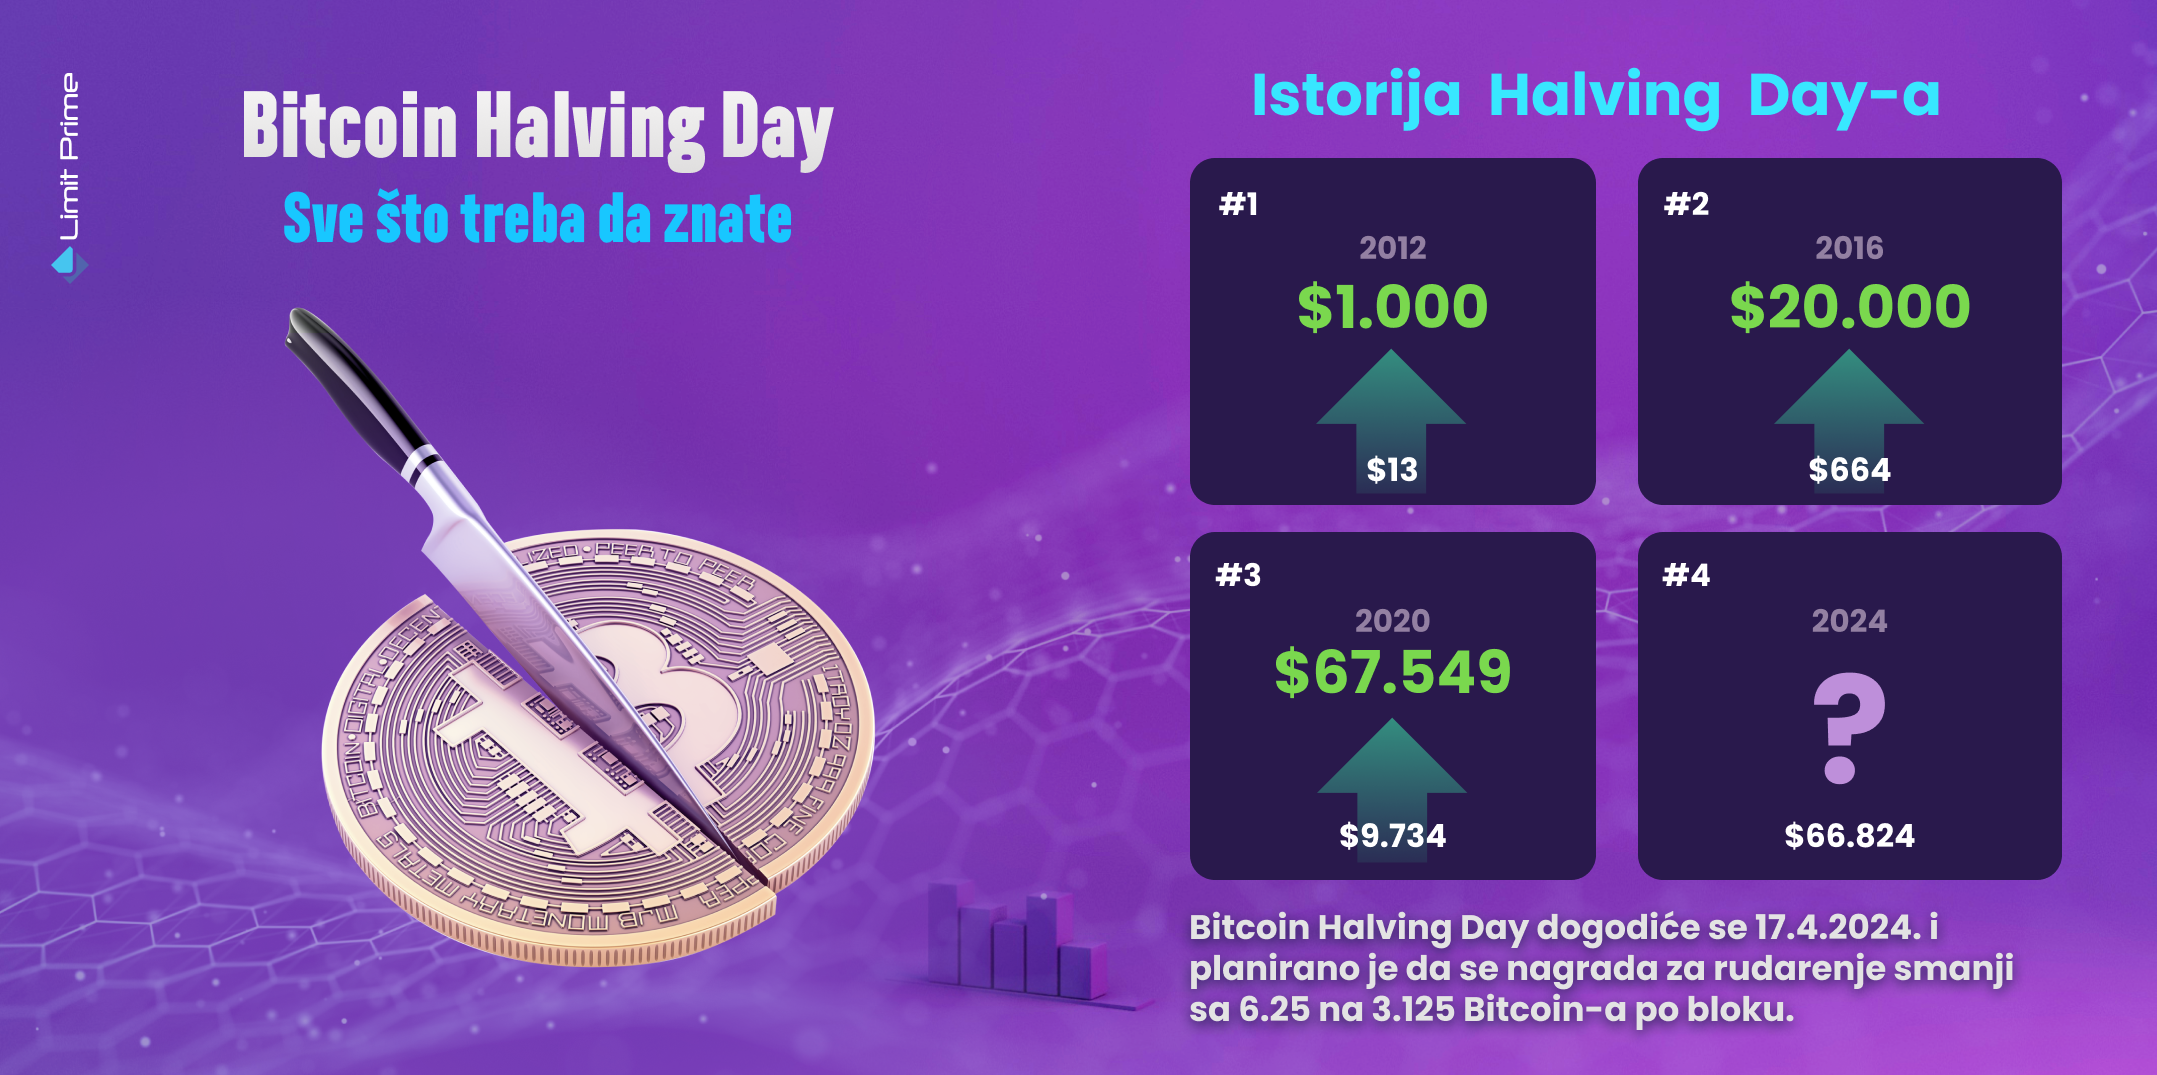 Bitcoin Halving Day: Everything you need know